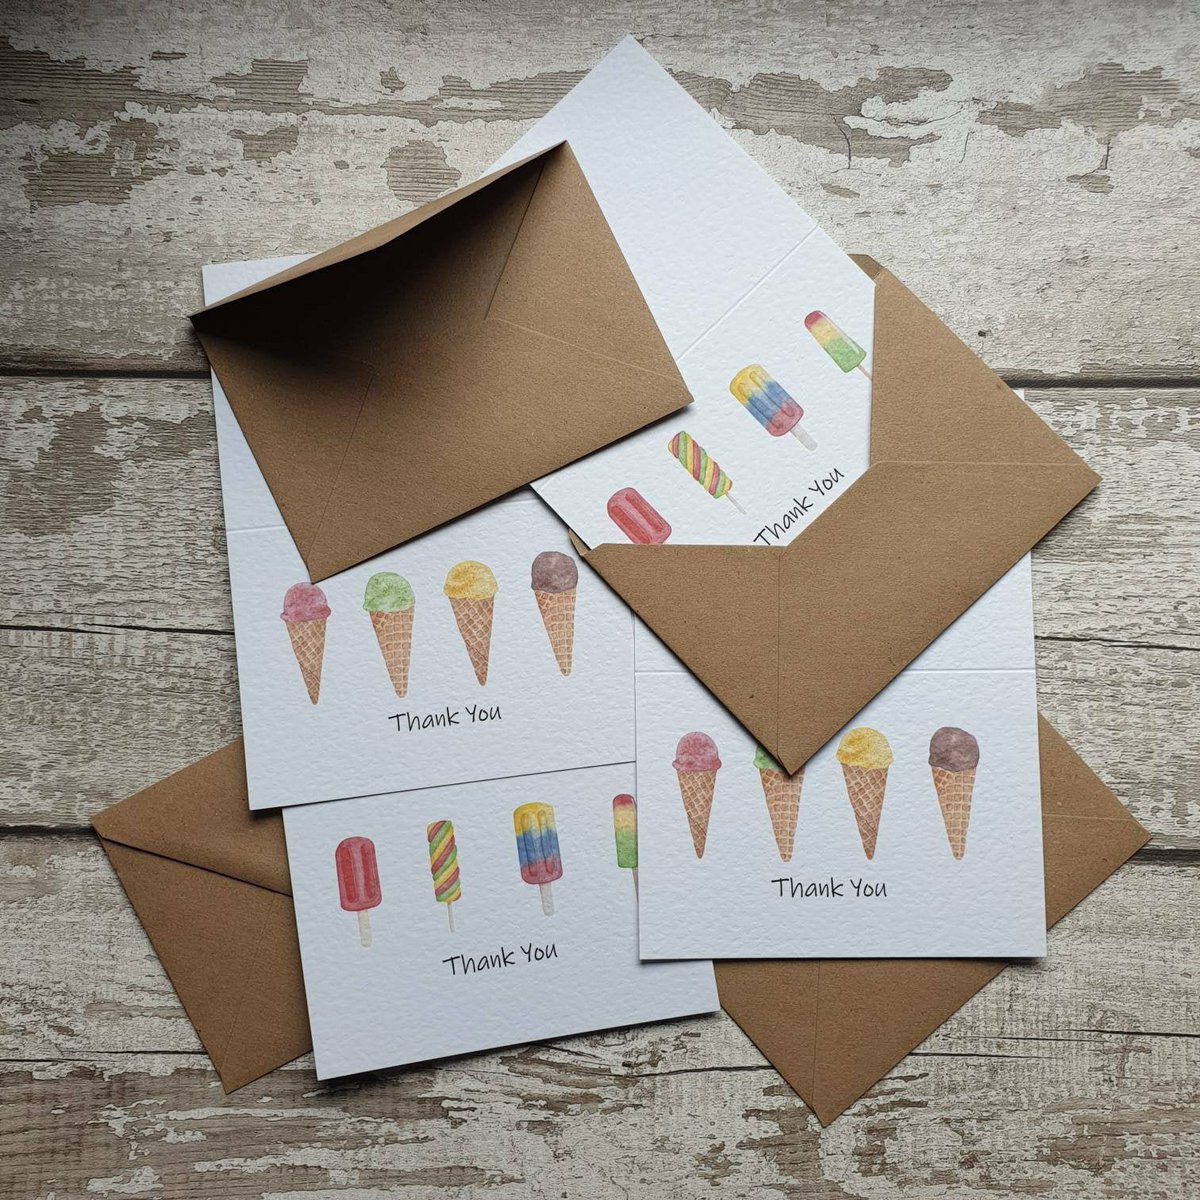 Excited to share the latest addition to my #etsy shop: Ice Cream Collection. A6 Note Cards. Can Be Personalised 

etsy.me/3eTkojD

#thankyou #notelets #blank #cards #notecards #greetings #cute #handmade #madeinsheffield #shopsmall #shoplocal #supportlocal #smallbusiness